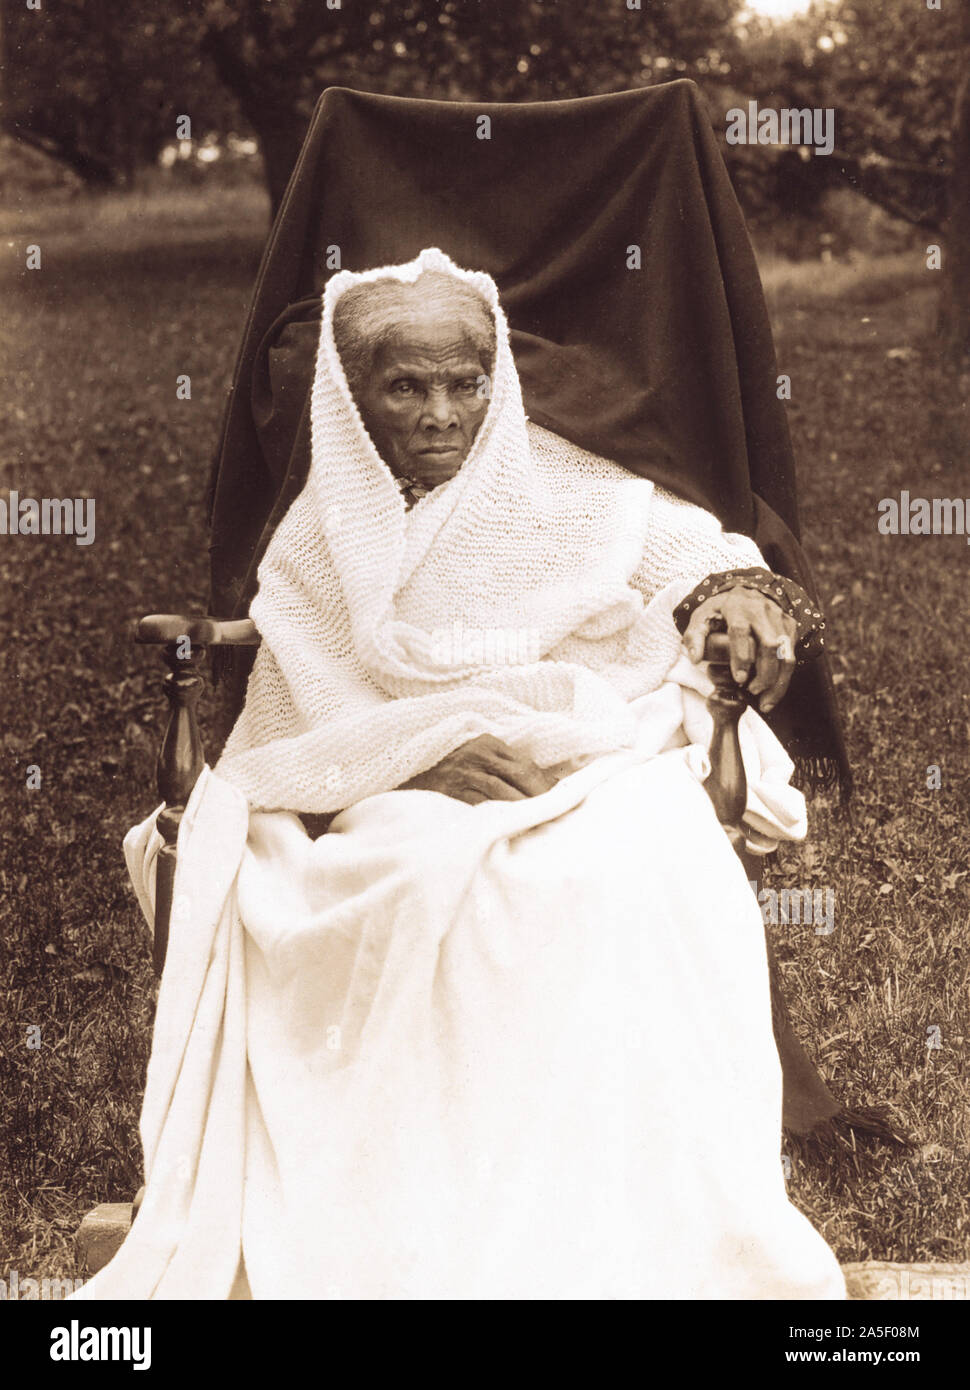 Harriet Tubman (born Araminta Ross, c. March 1822[1] – March 10, 1913) was  an American abolitionist and political activist. Born into slavery, Tubman  escaped and subsequently made some 13 missions to rescue